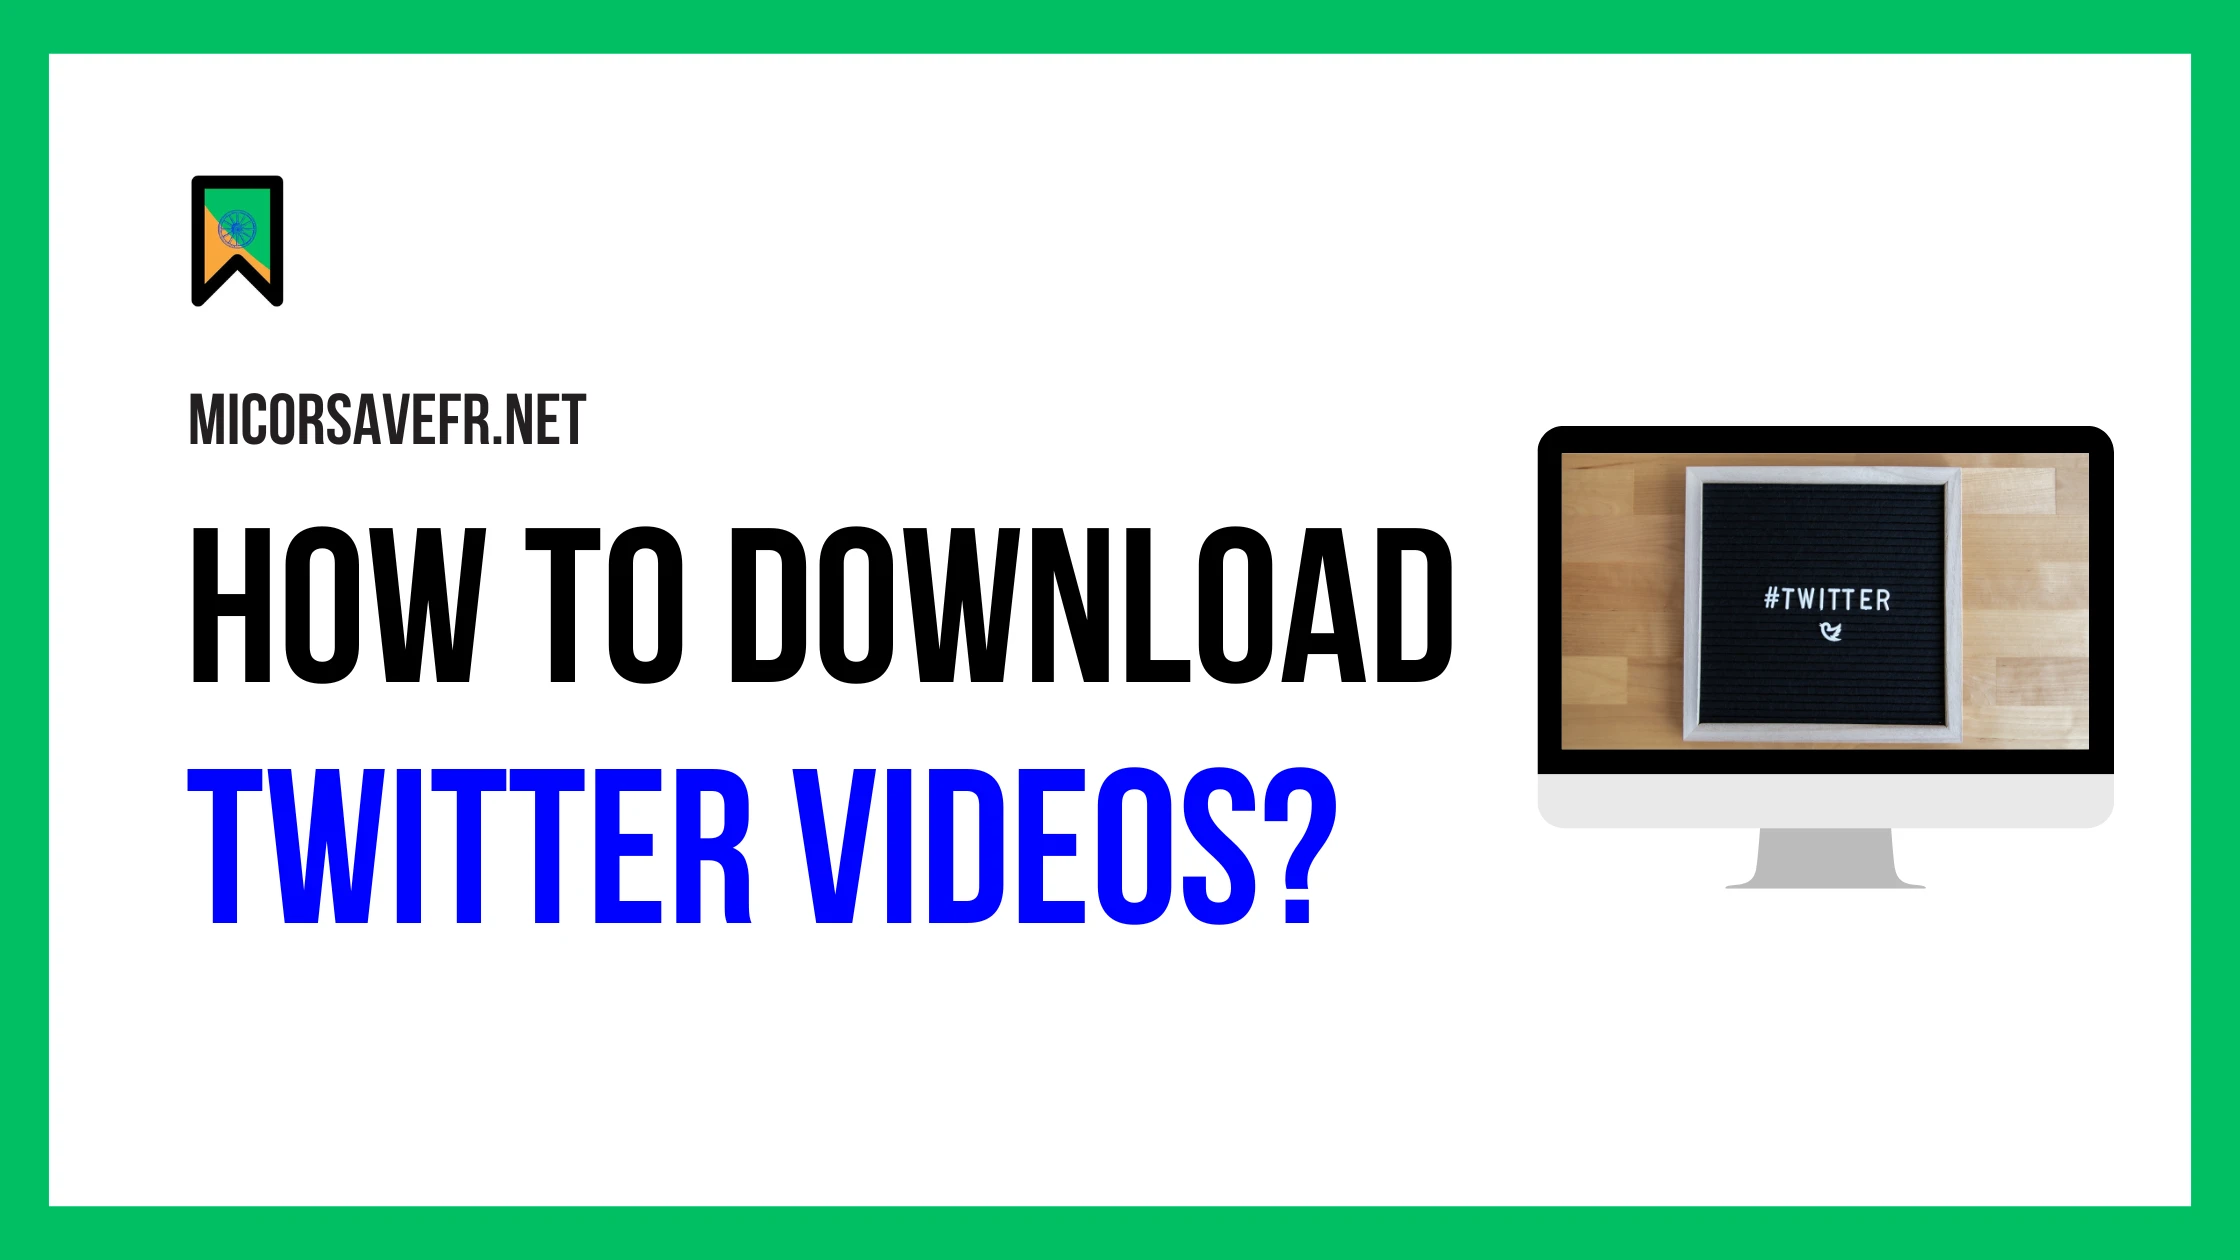 How To Use Twitter Video Downloader?